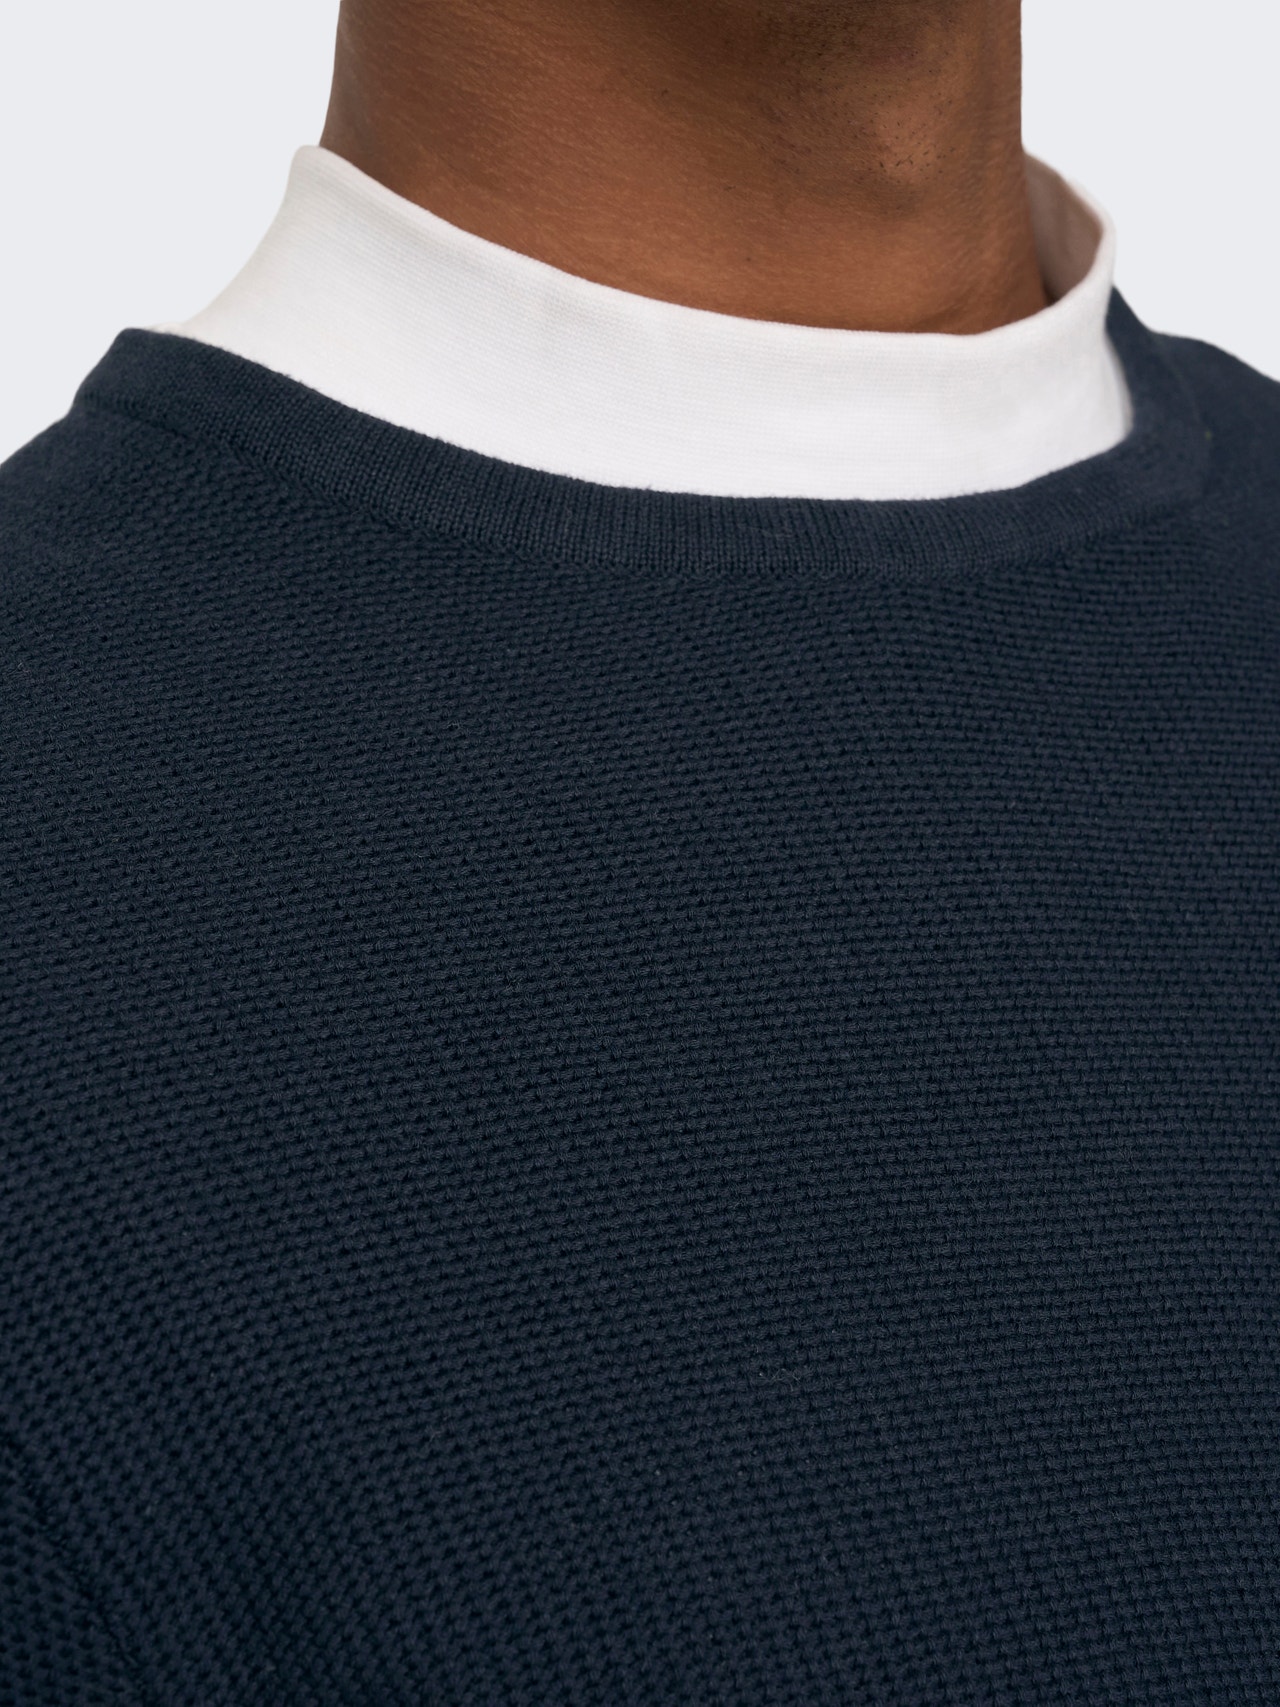 ONLY & SONS Round neck knitted Pullover -Dark Navy - 22023201